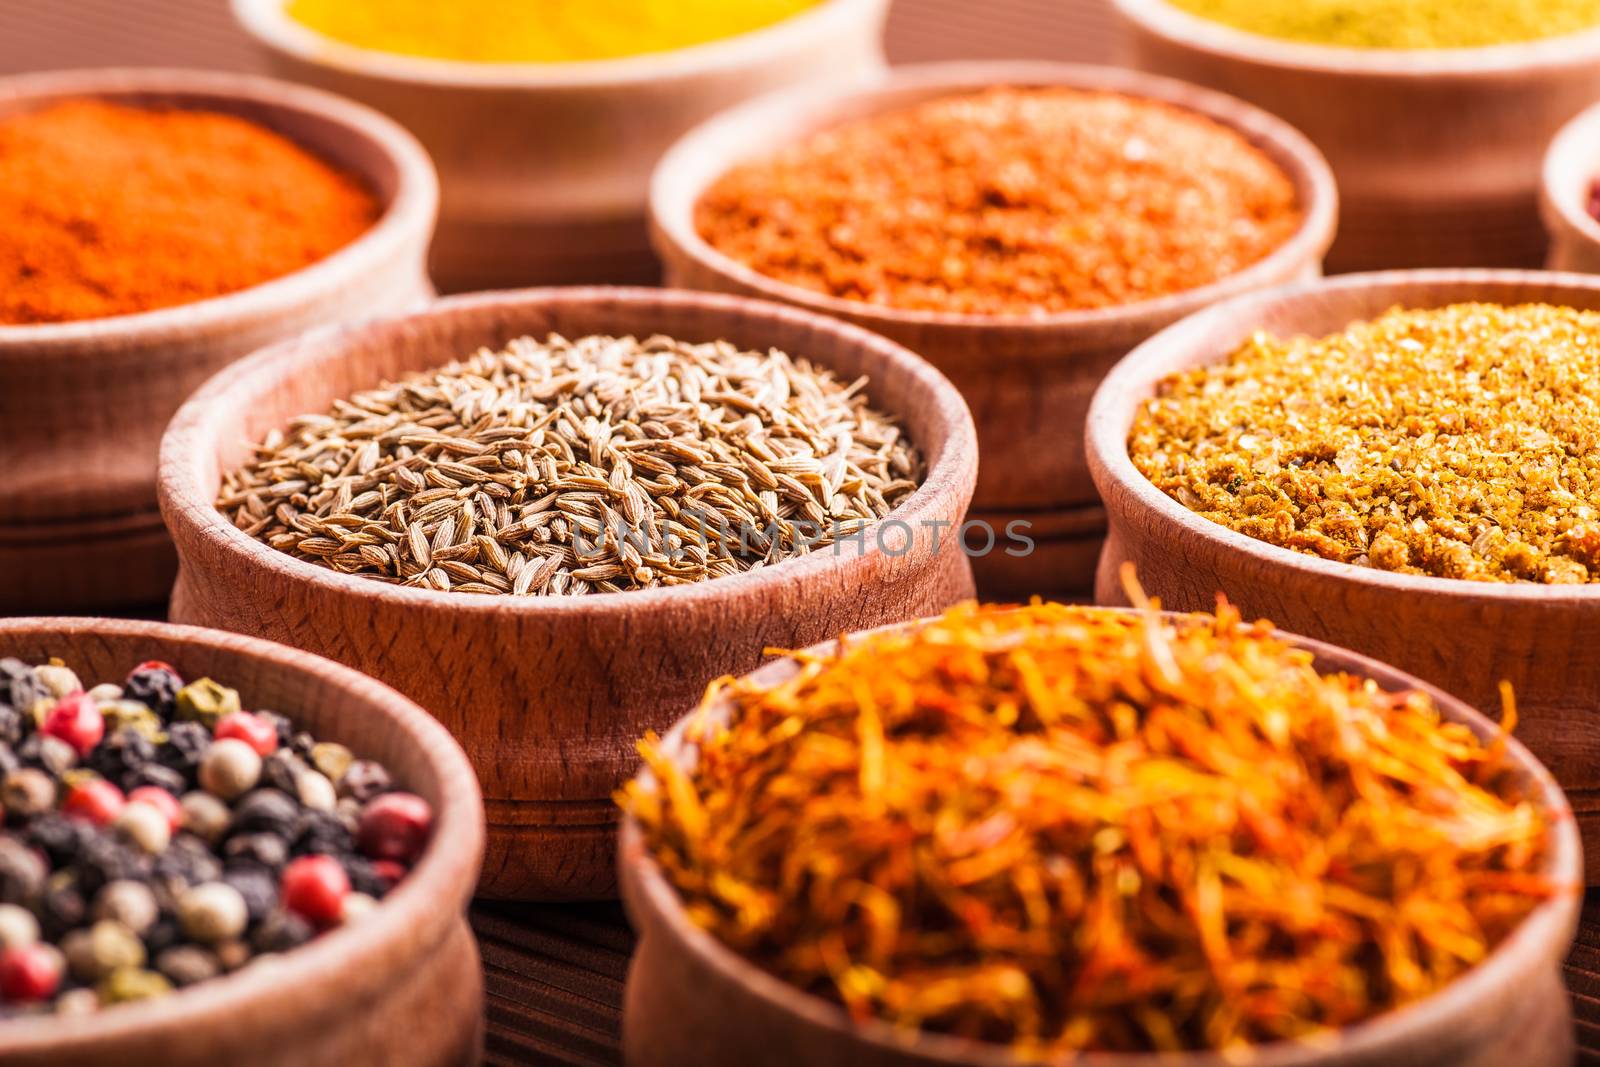 spices in a wooden bowl close-up on a brown background